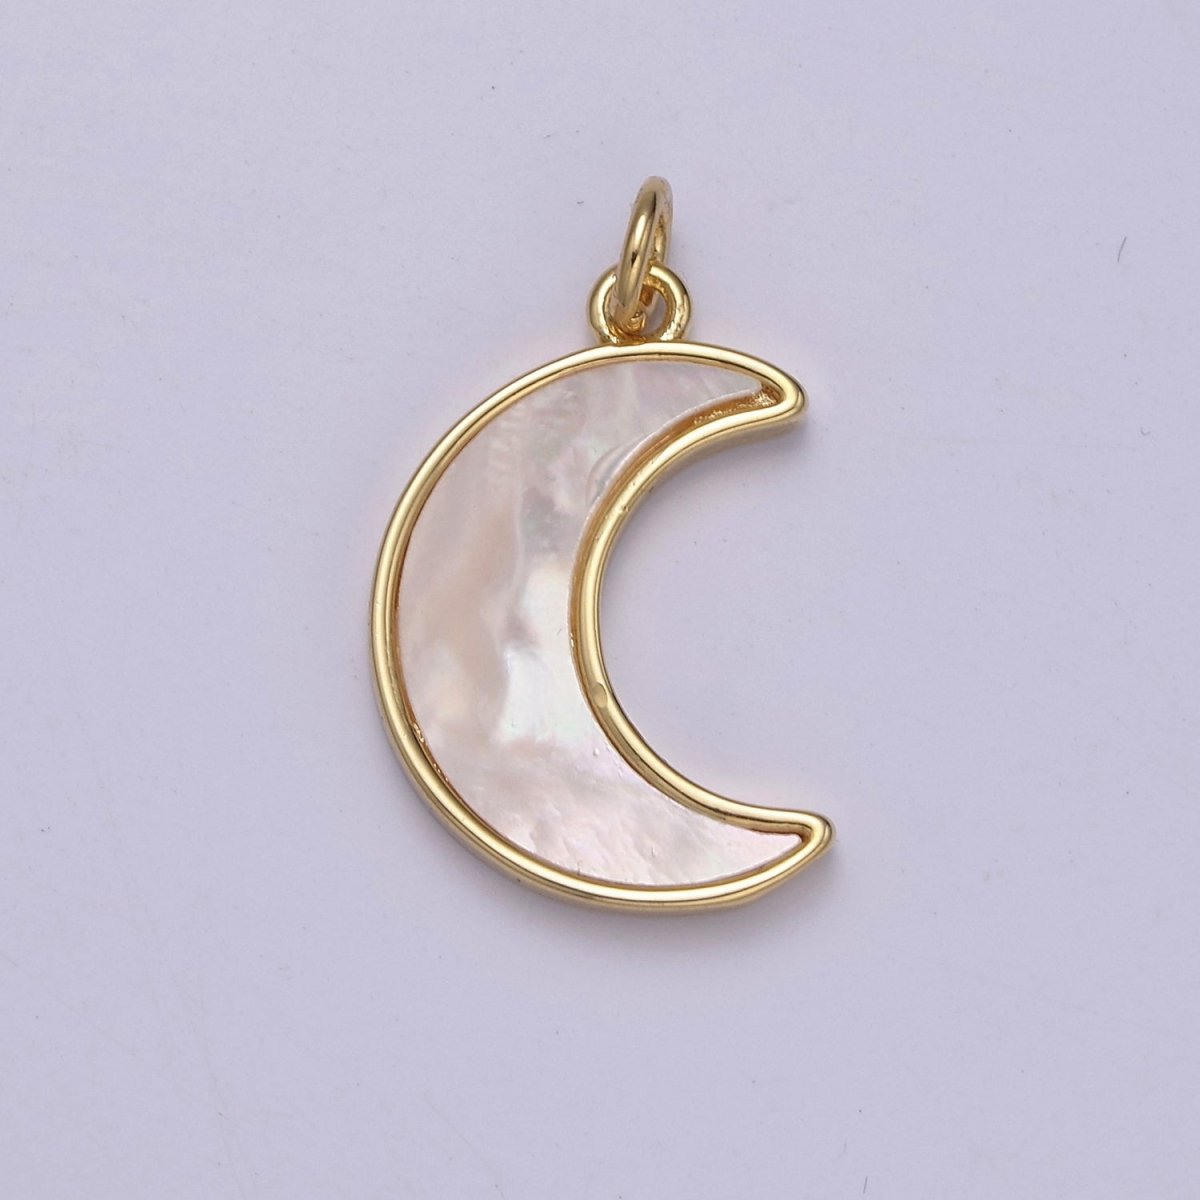 Dainty Crescent Moon Pendant Shell Pearl Moon Charm 14k Gold Filled Jewelry Supplies E-336 - DLUXCA